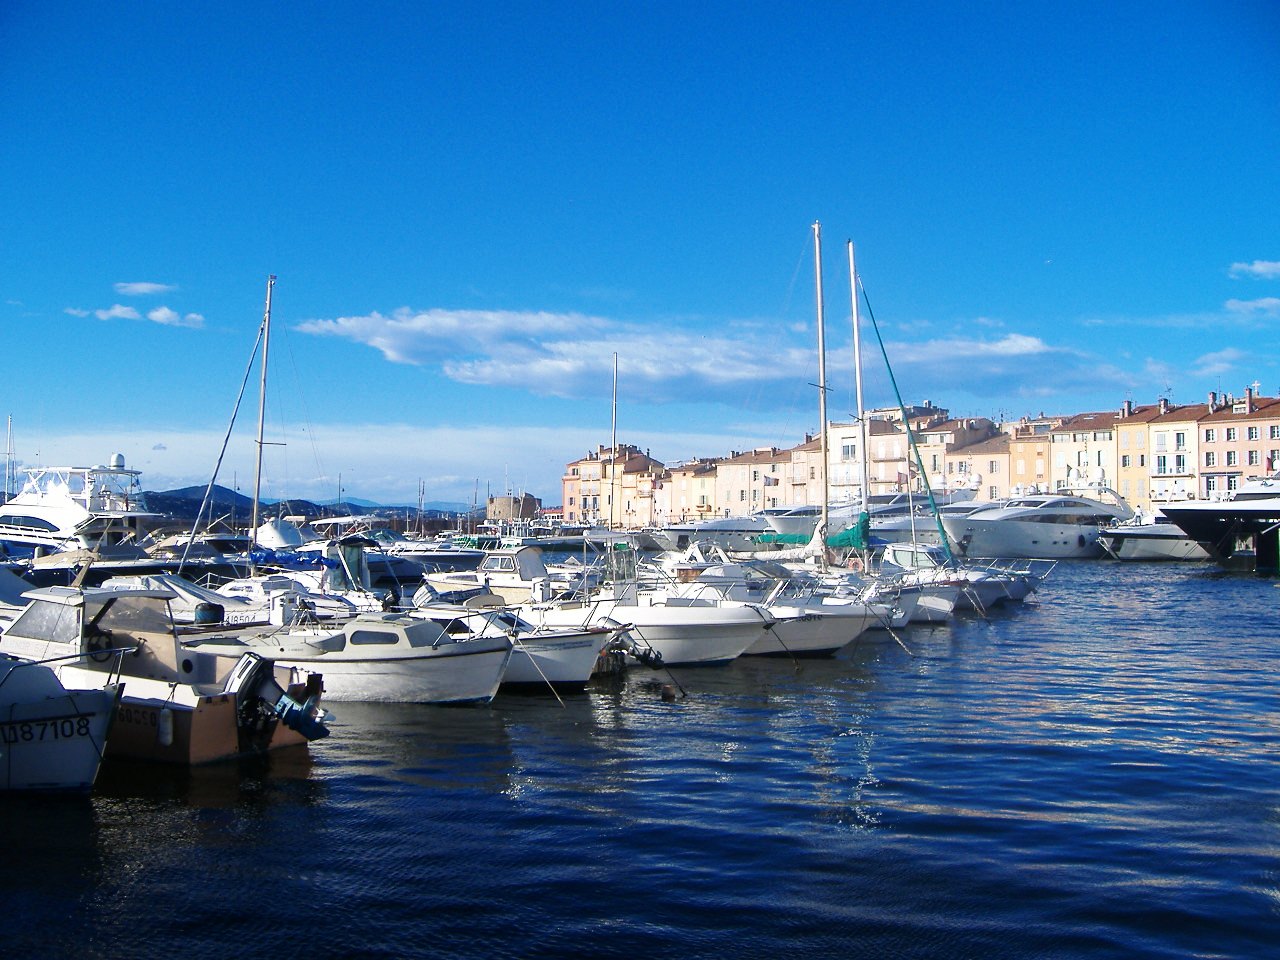 The port of St Tropez in the Mediterranean French Riviera